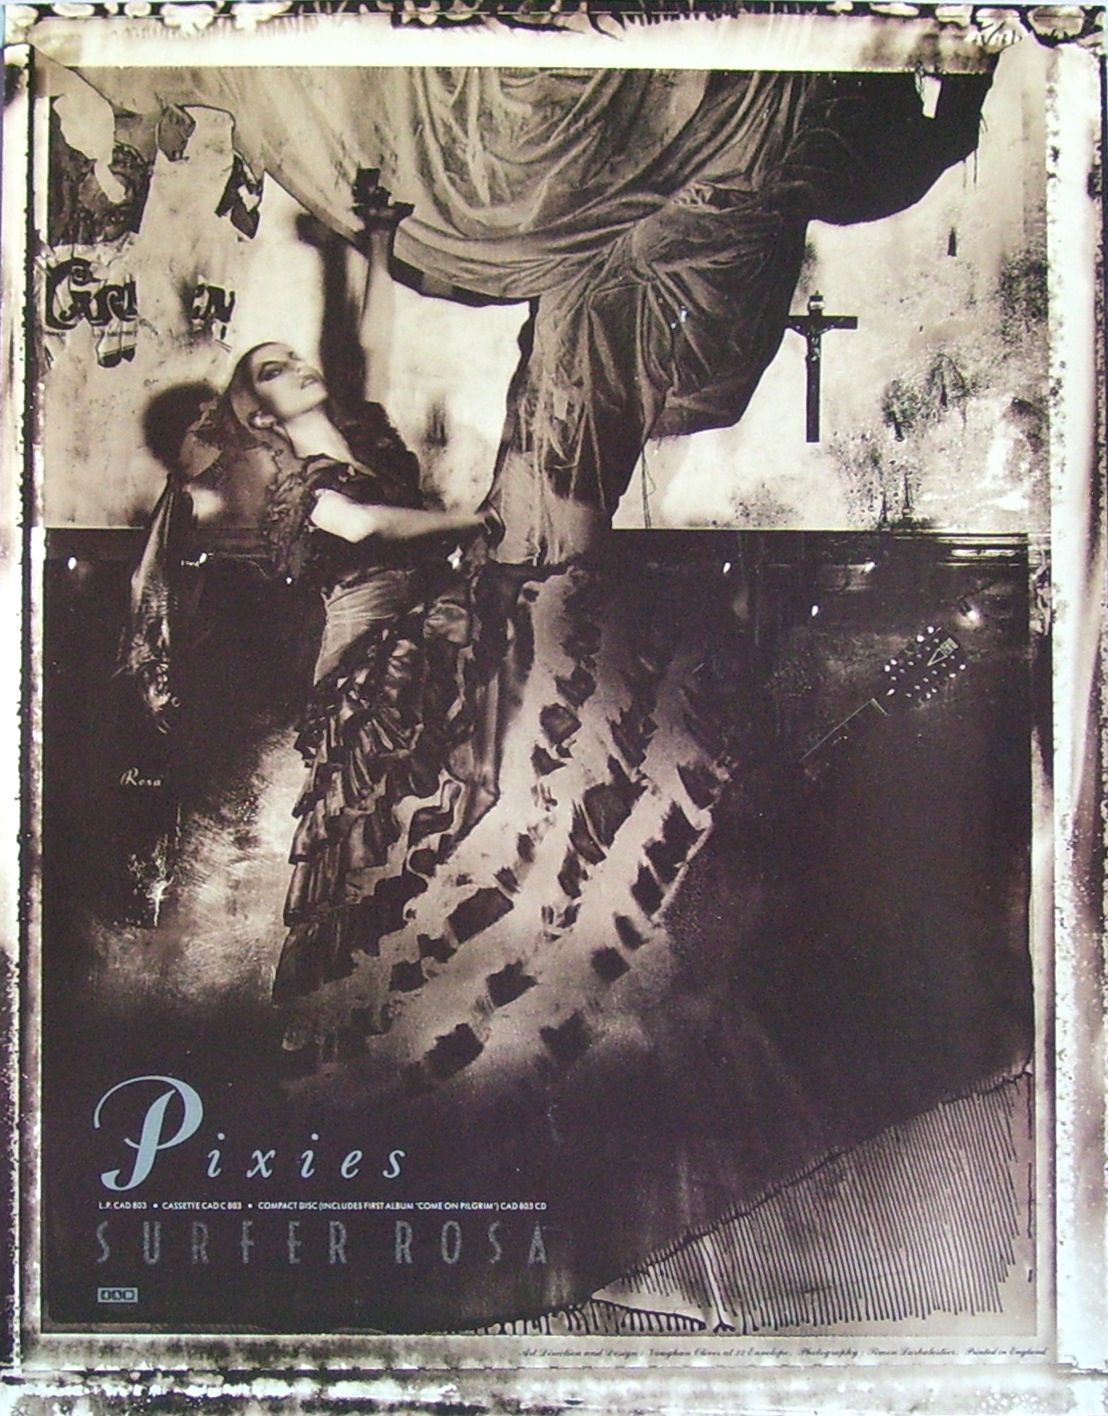 Surfer Rosa 2. Music poster, Album cover art, Band posters